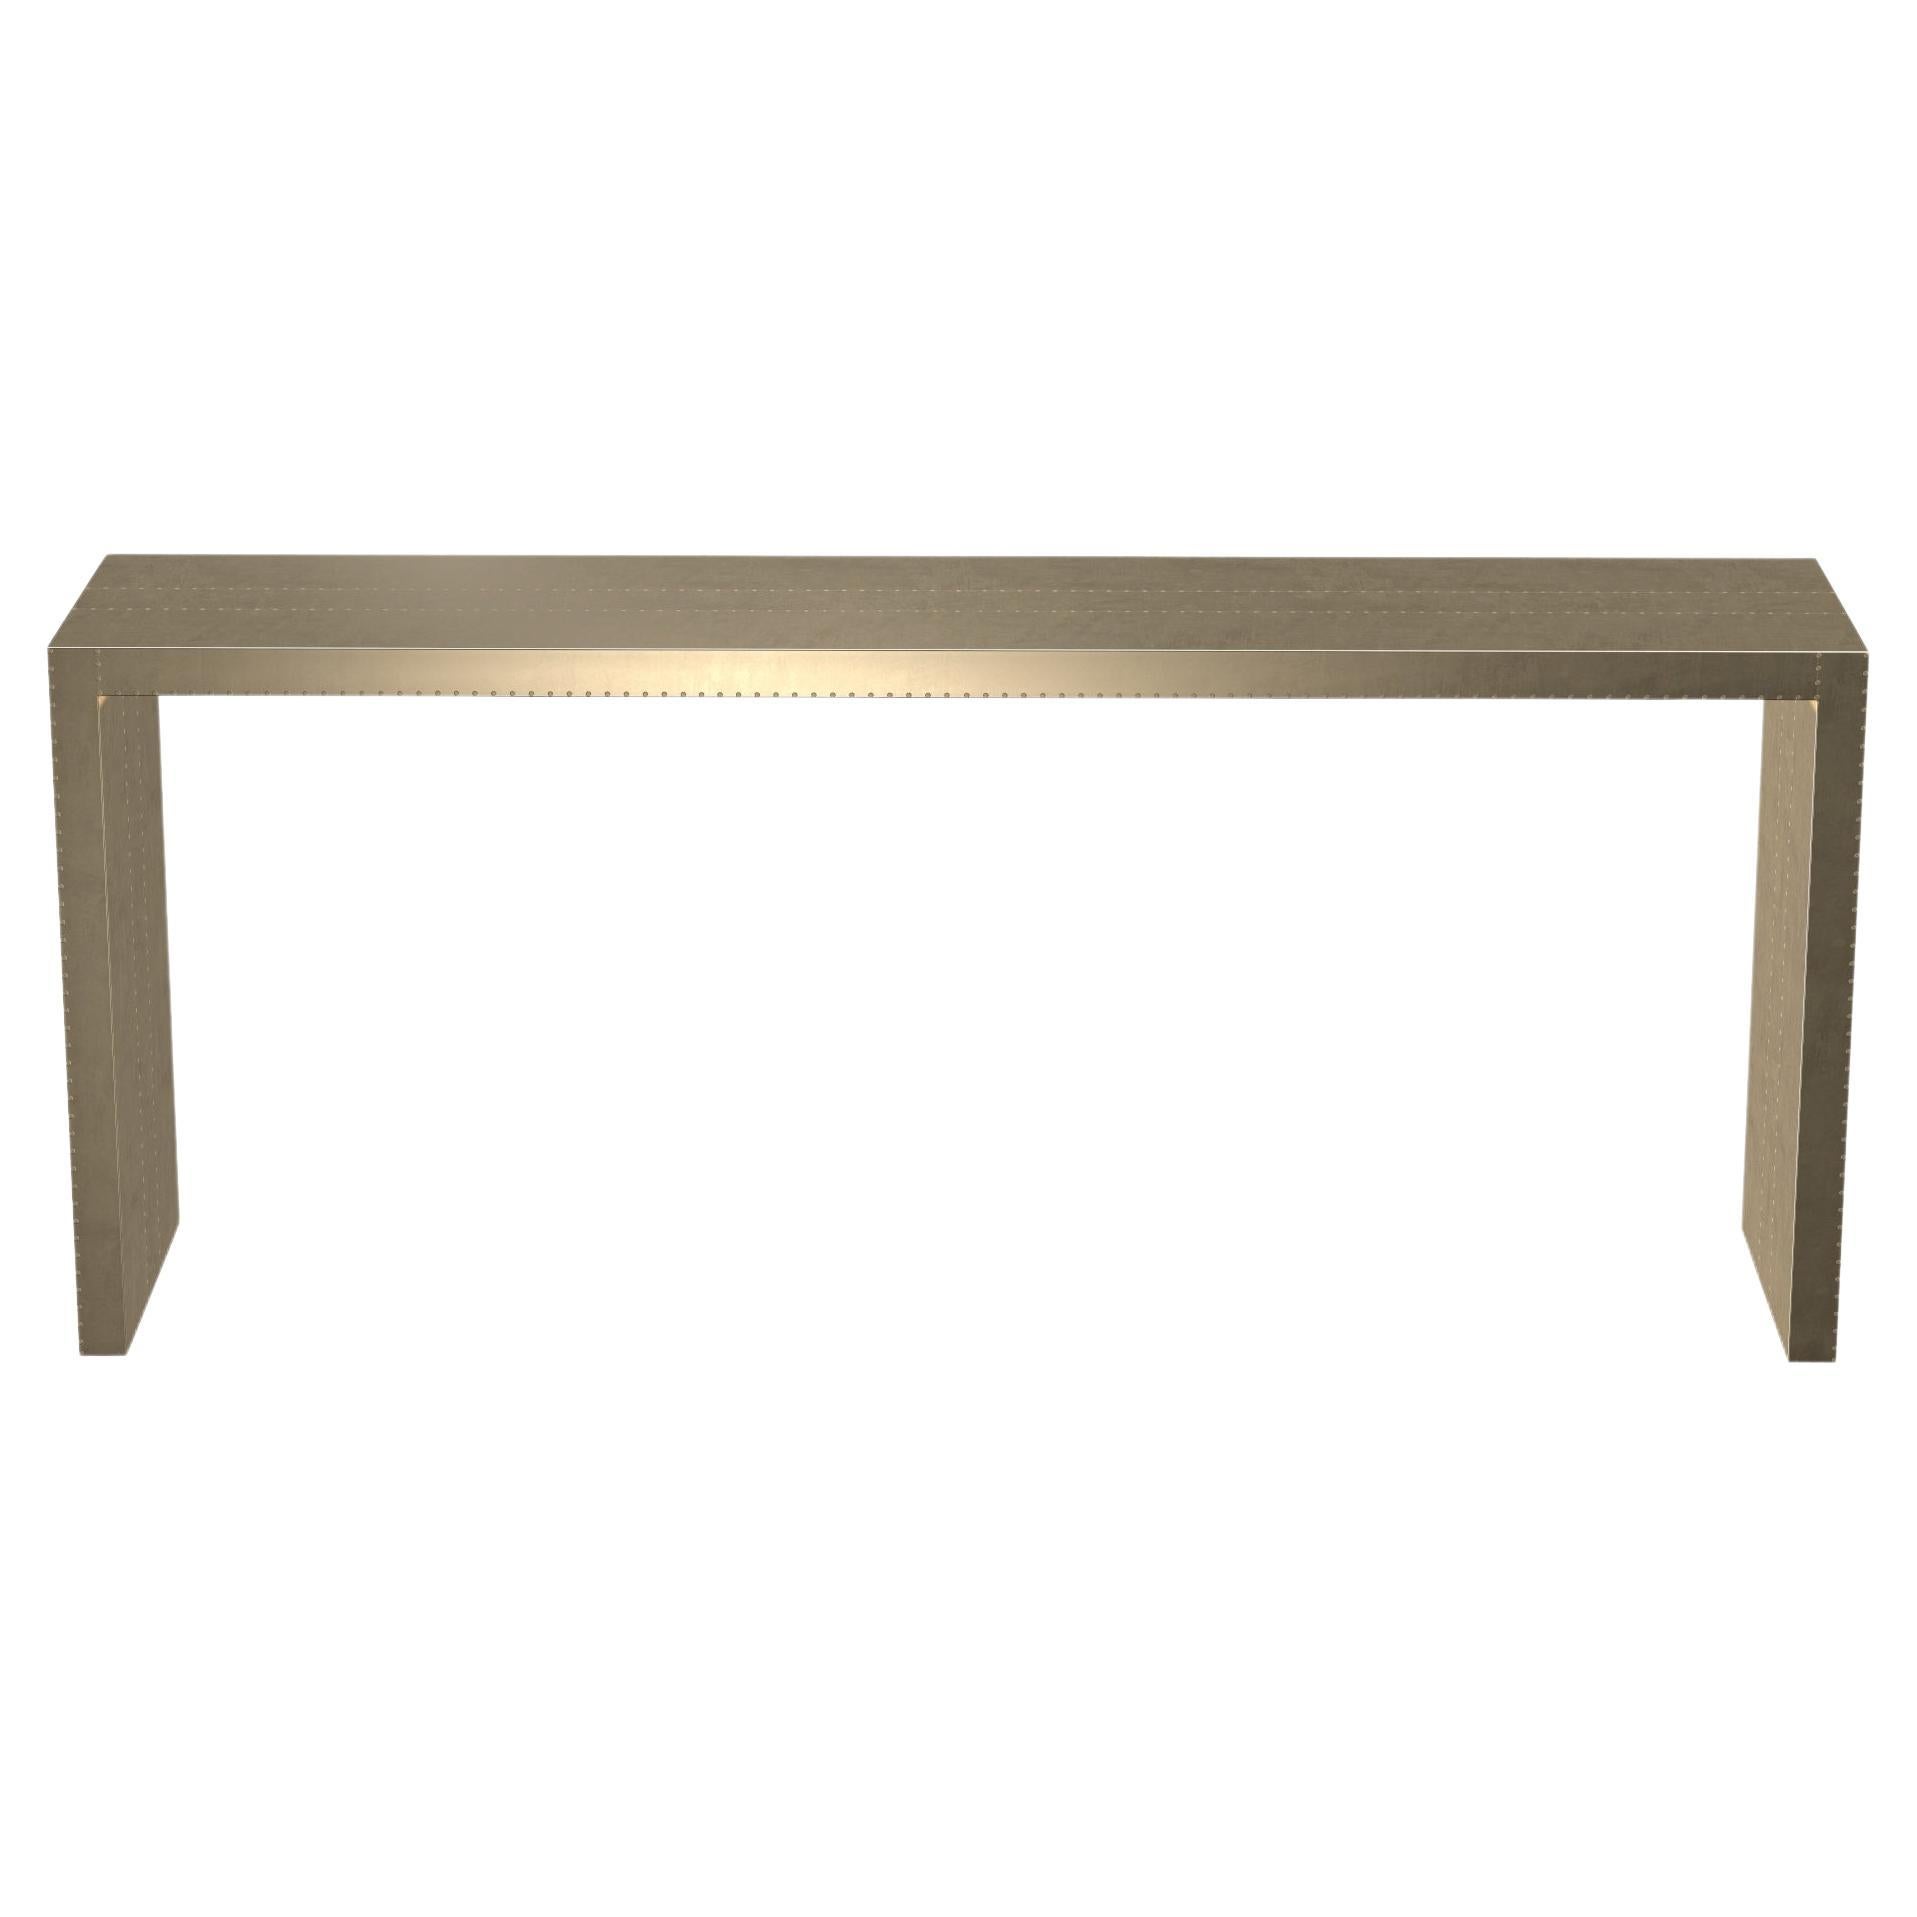 Art Deco Conference Tables Rectangular Console in Smooth Brass by Alison Spear For Sale